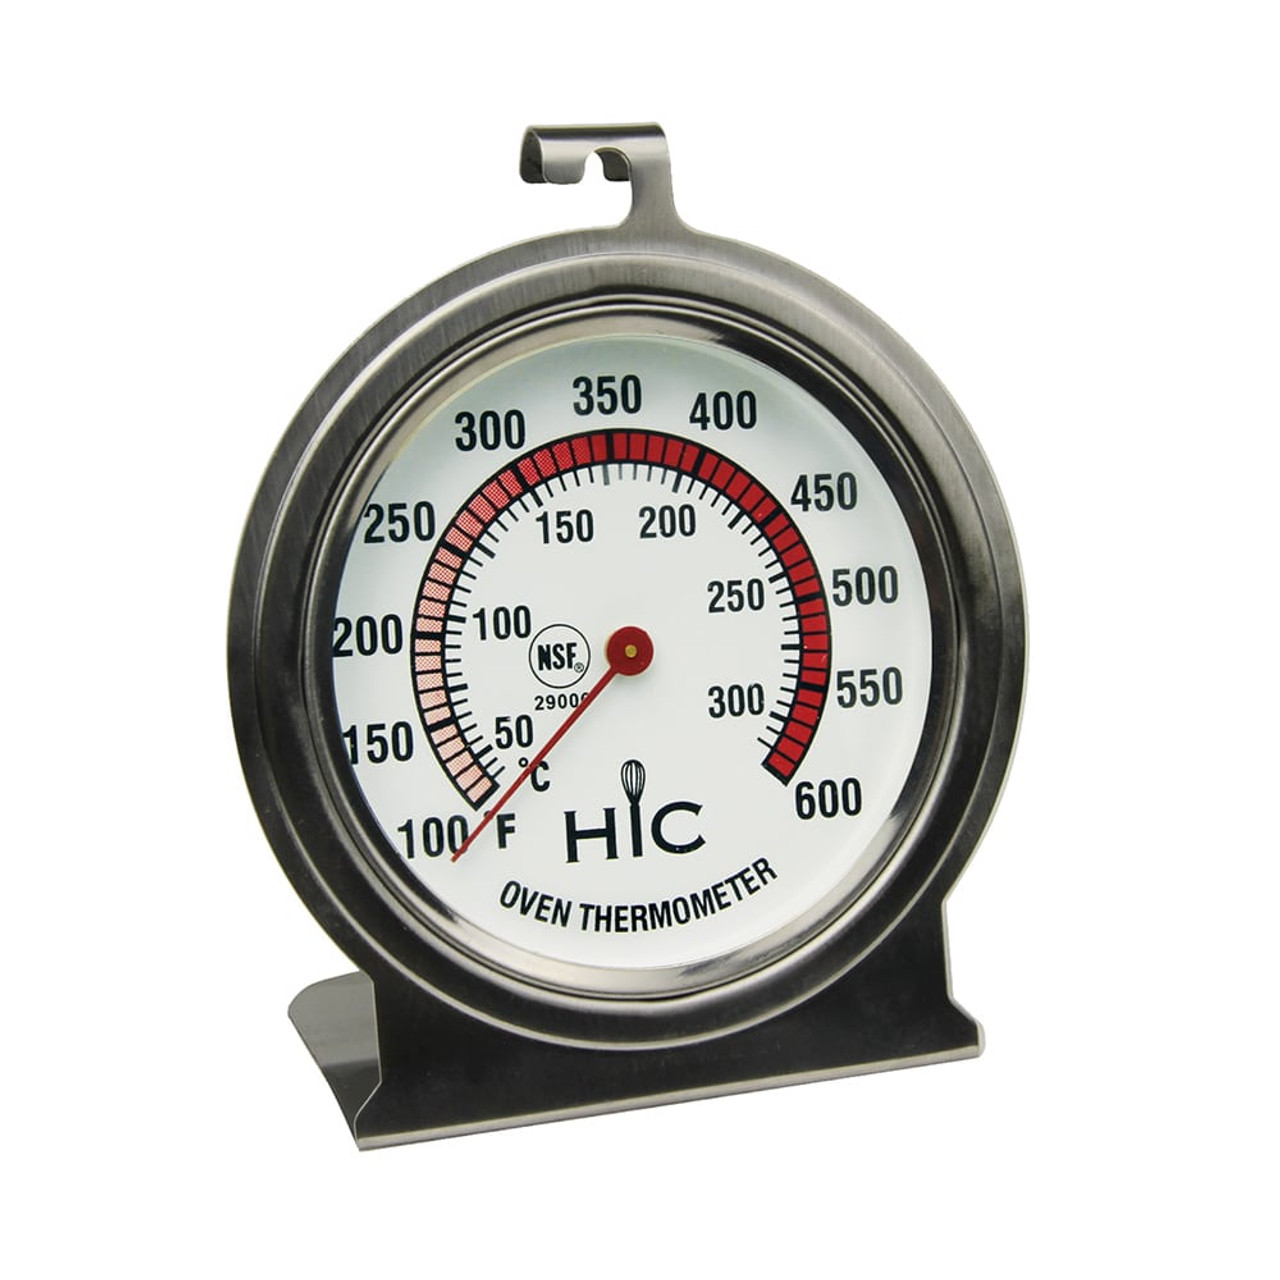 https://cdn11.bigcommerce.com/s-hccytny0od/images/stencil/1280x1280/products/2618/9219/oven-thermometer-2__83213.1563102916.jpg?c=2?imbypass=on